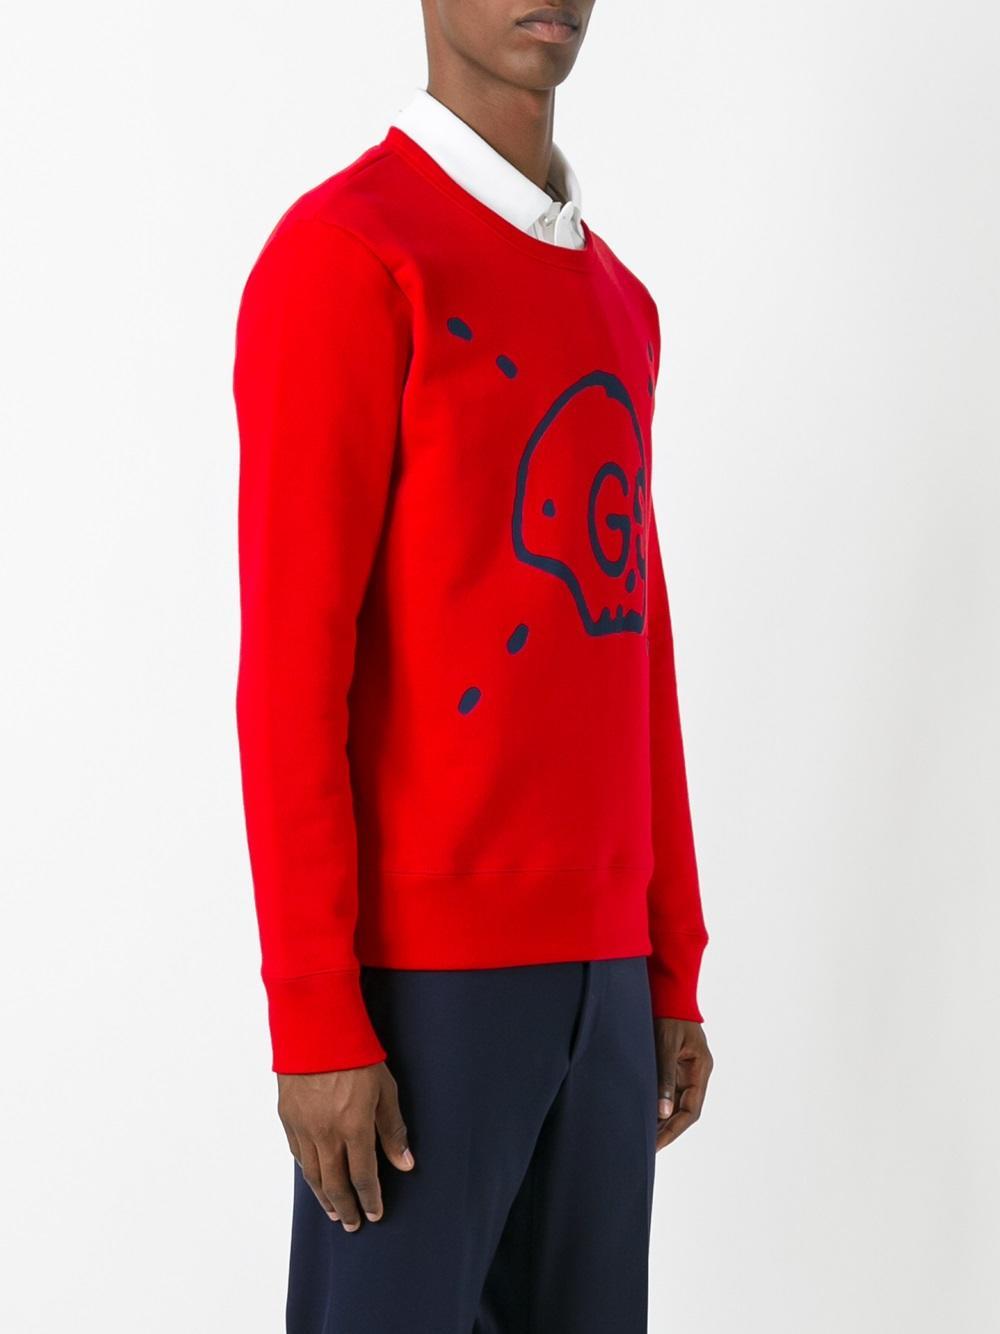 Gucci Ghost Sweatshirt in Red for Men - Lyst